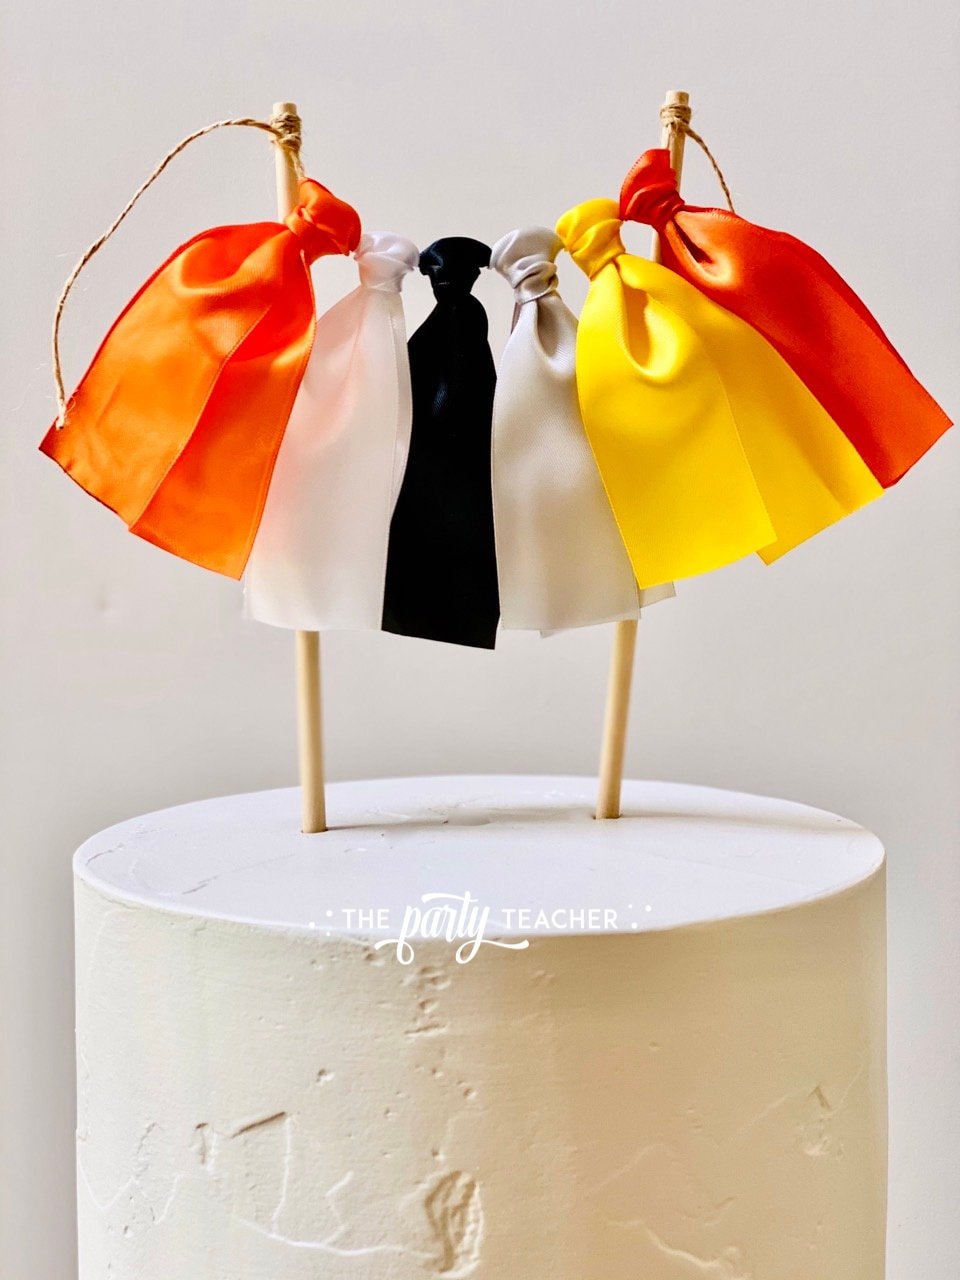 Construction Ribbon Cake Topper - The Party Teacher